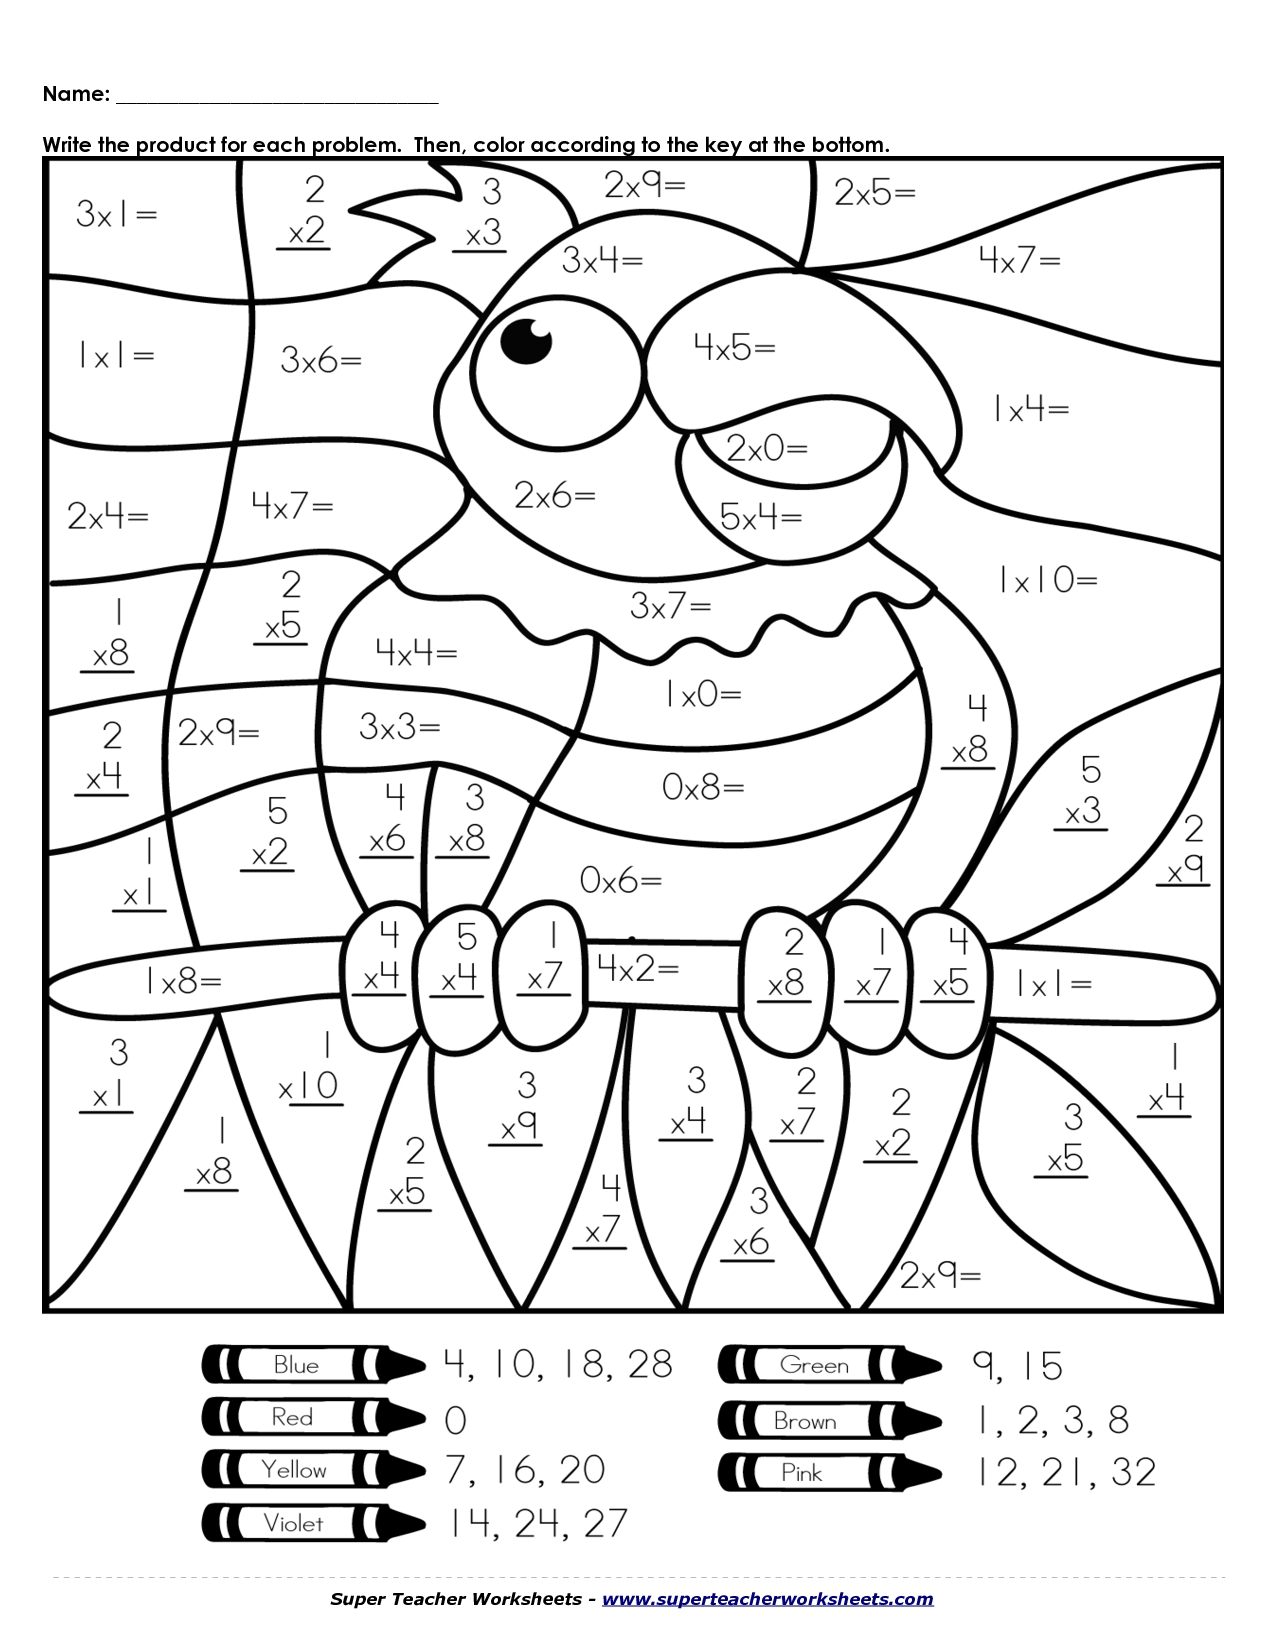 color-by-number-multiplication-worksheets-clip-art-library